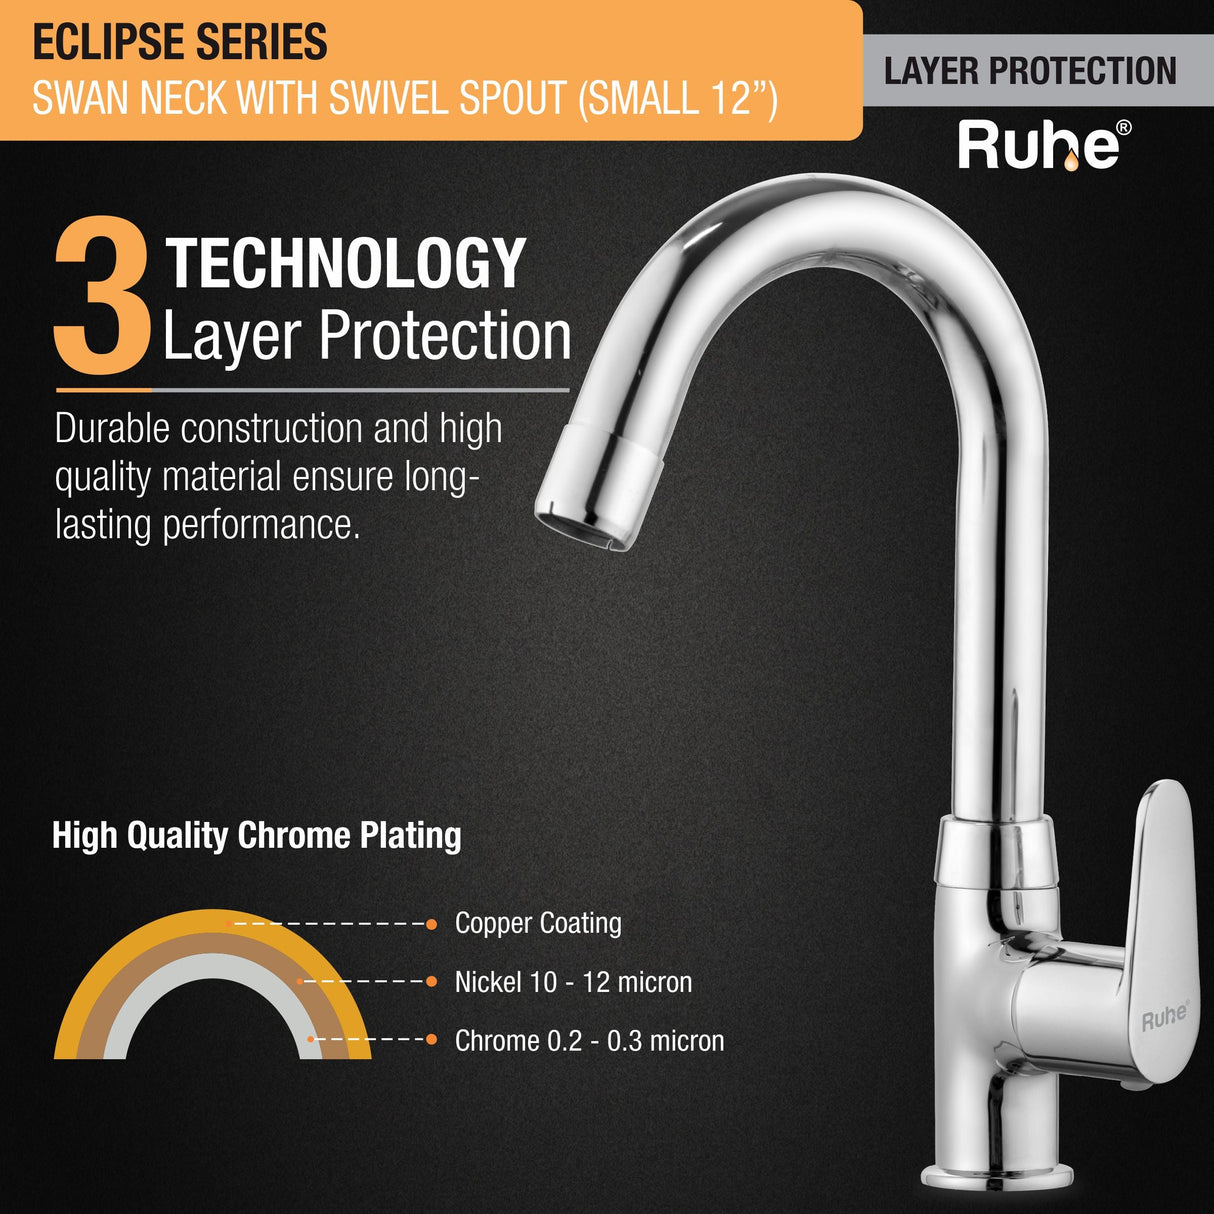 Eclipse Swan Neck with Small (12 inches) Round Swivel Spout Brass Faucet 3 layer protection